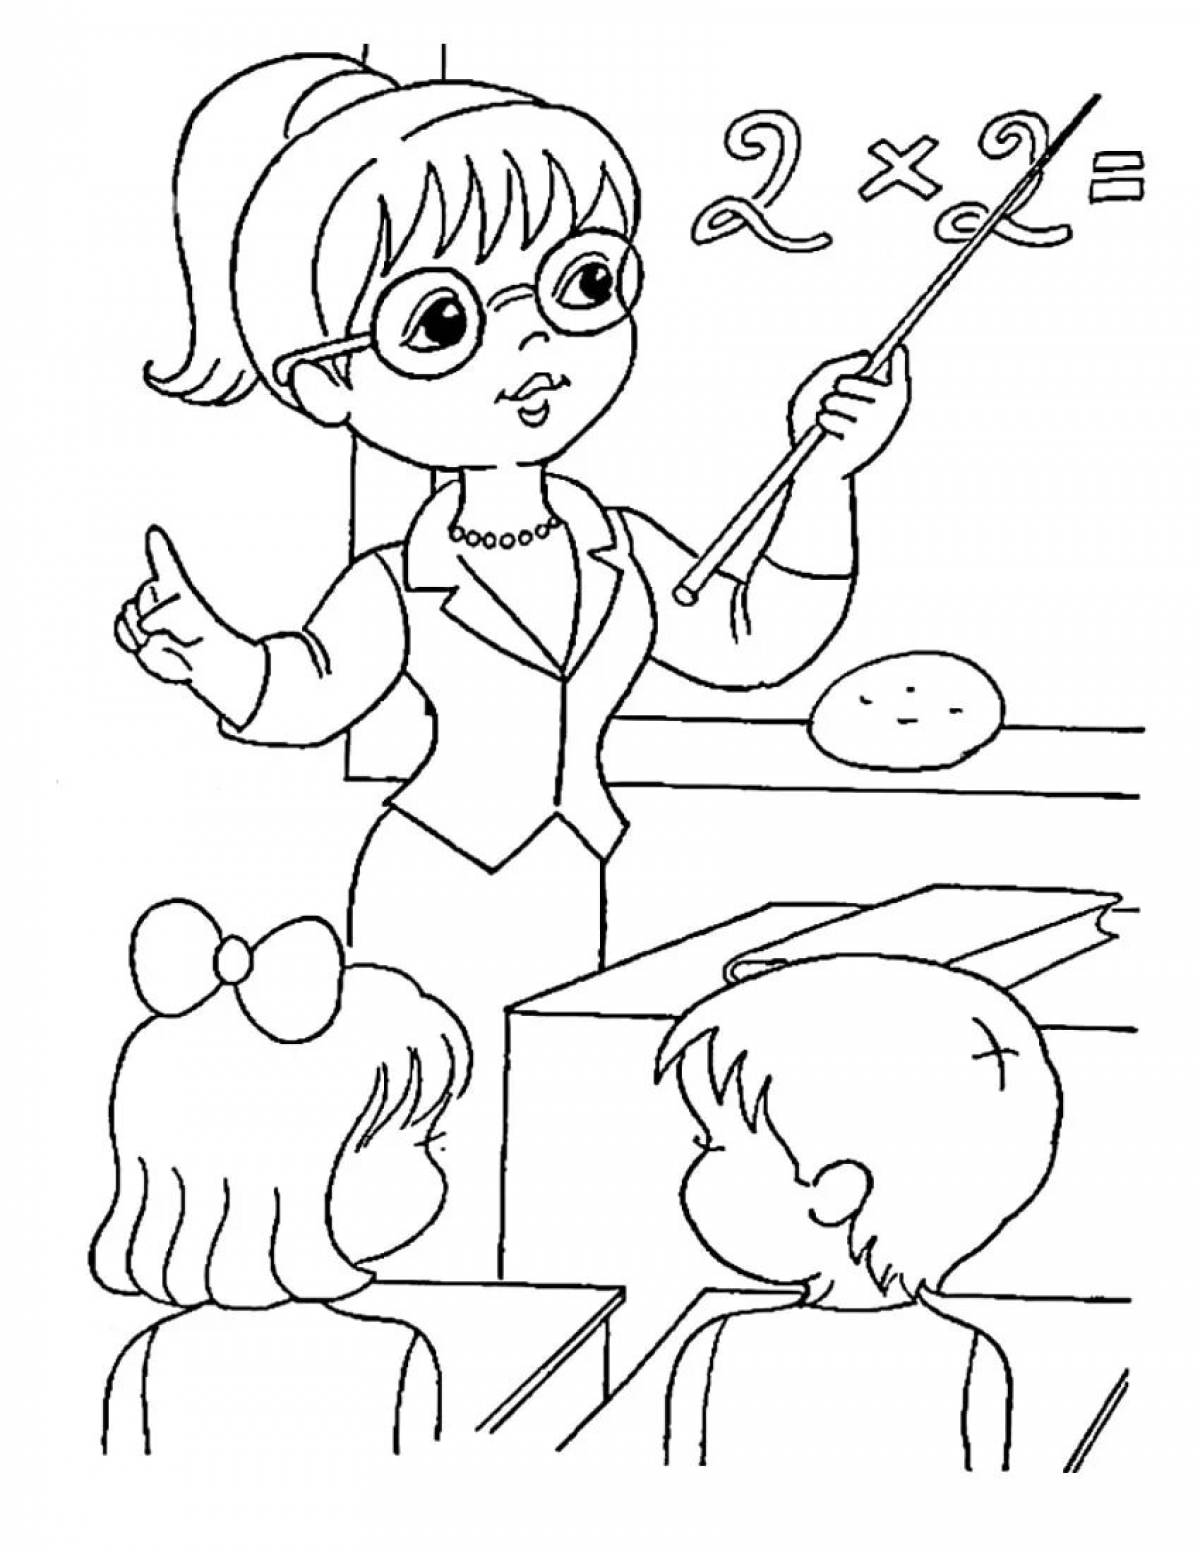 Coloring page enthusiastic astronaut